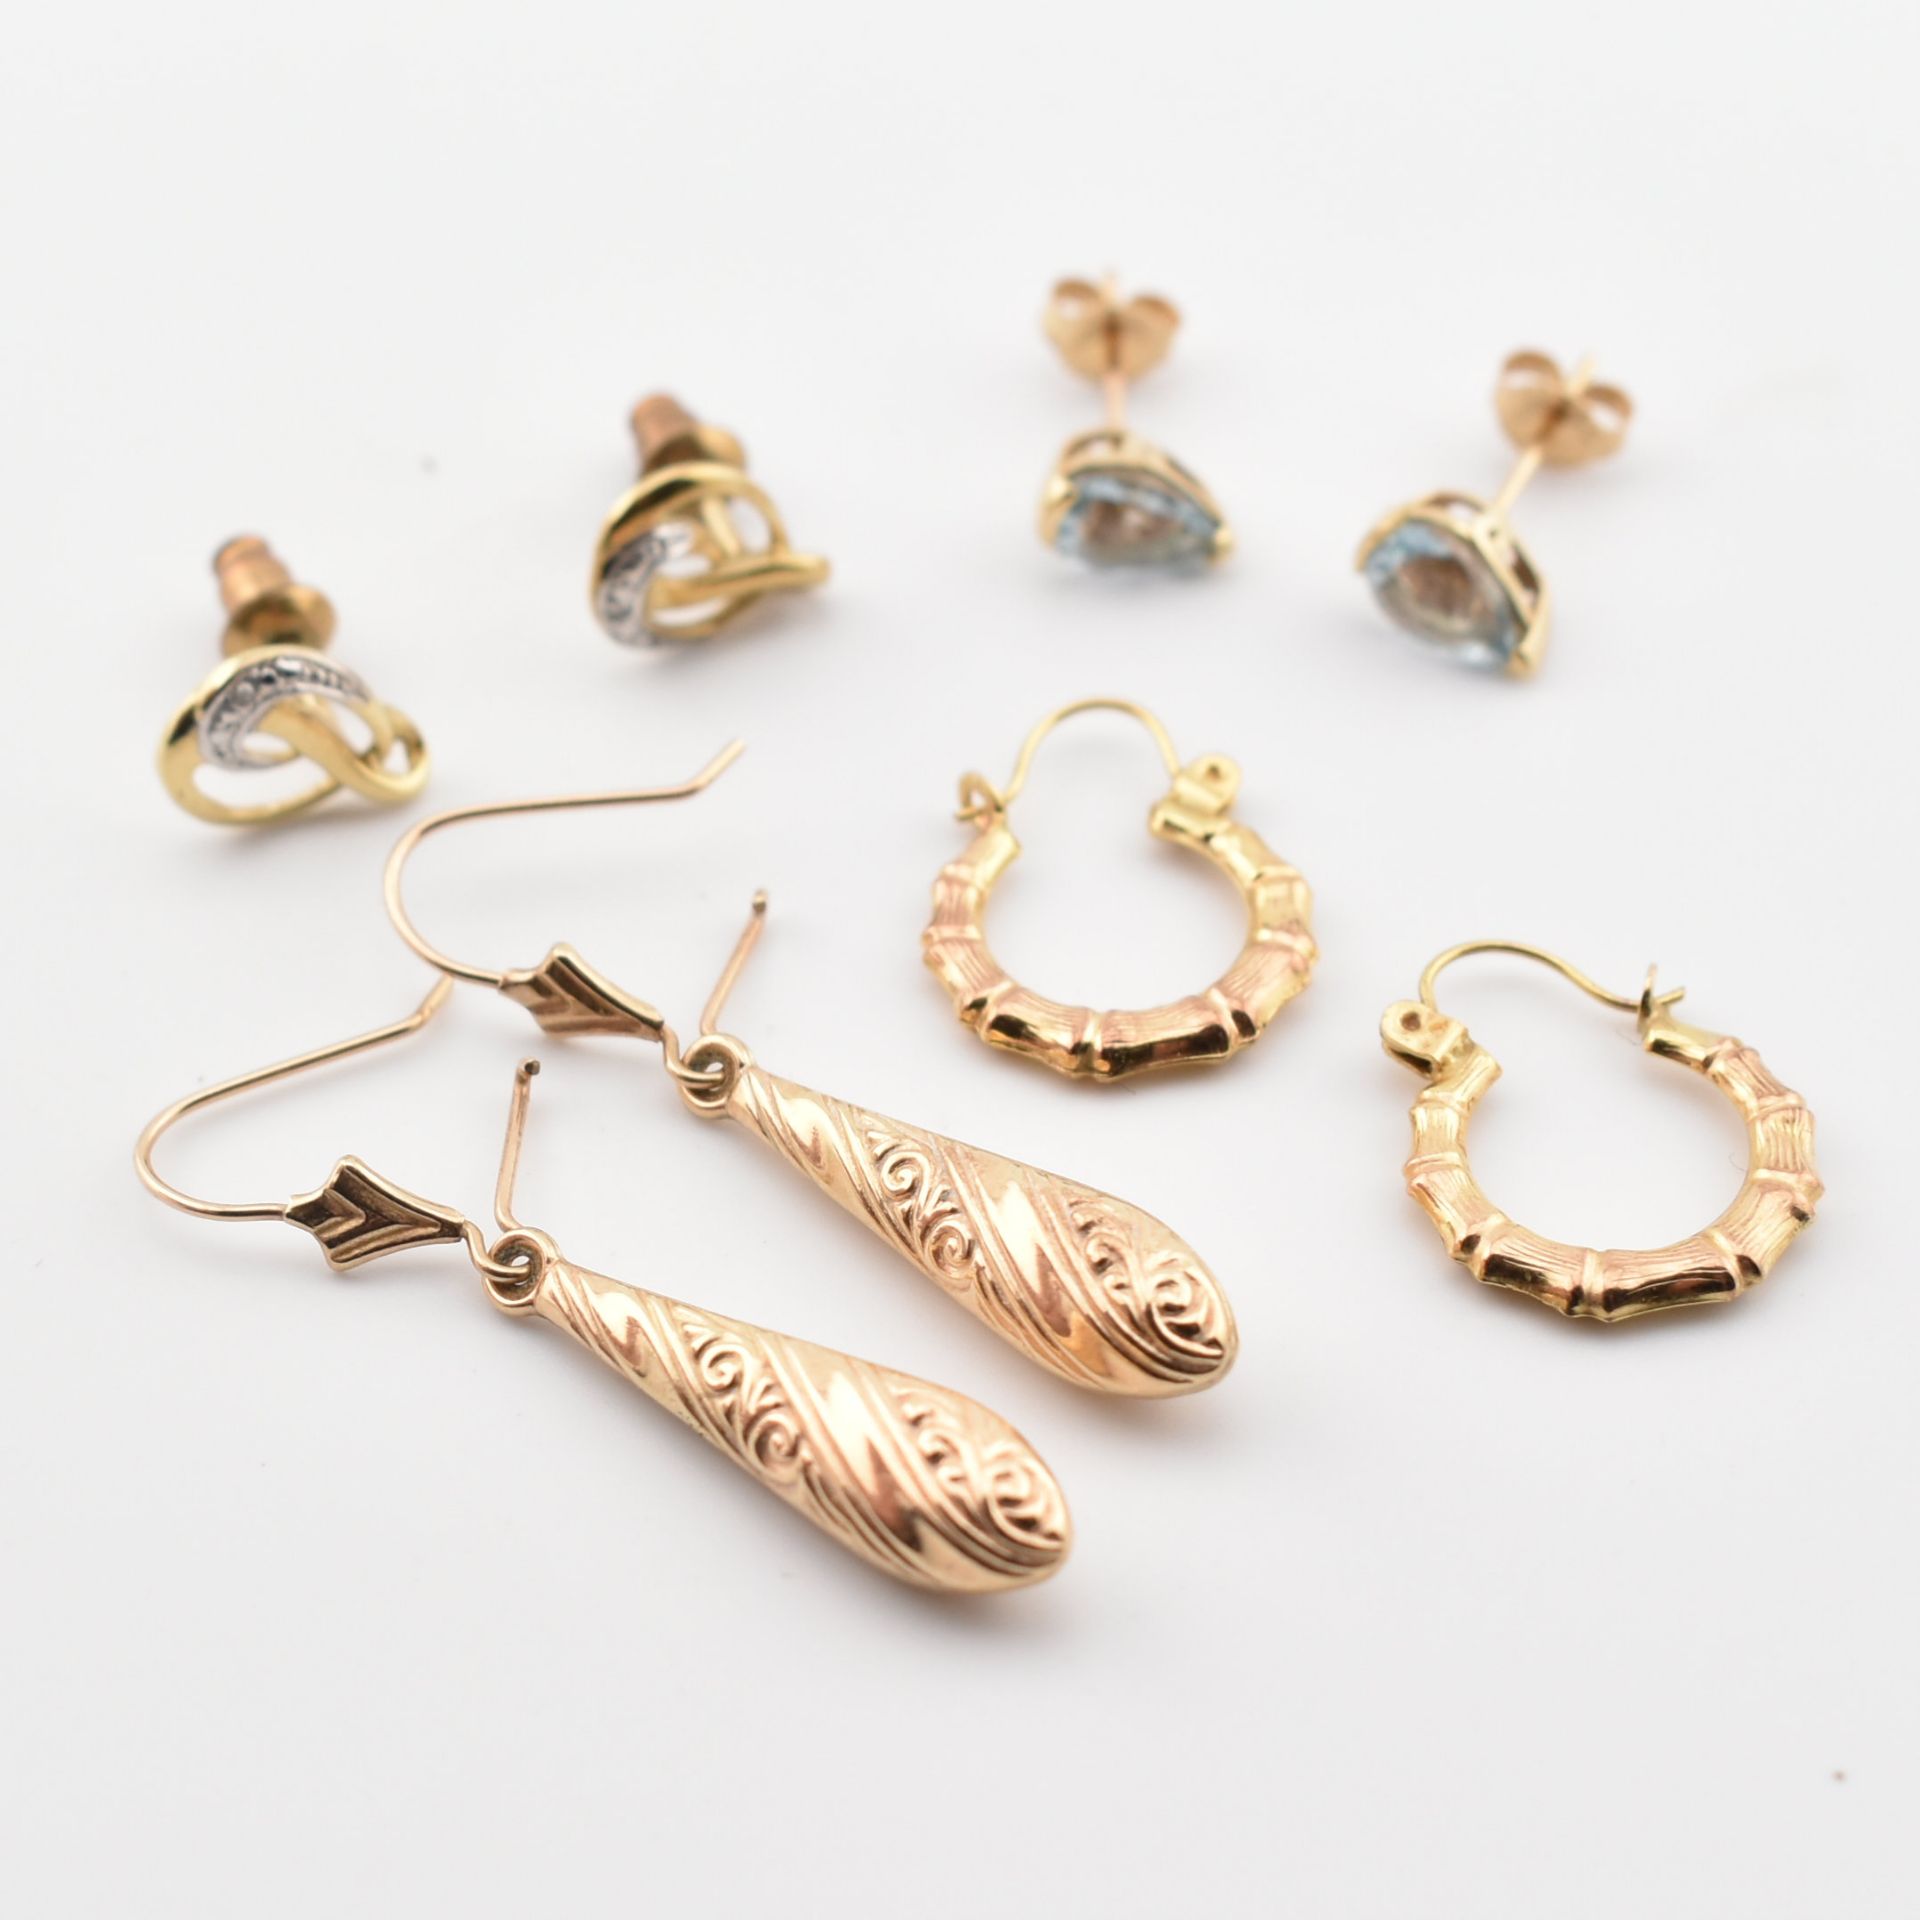 FOUR PAIRS OF 9CT GOLD & GEM SET EARRINGS - Image 4 of 4